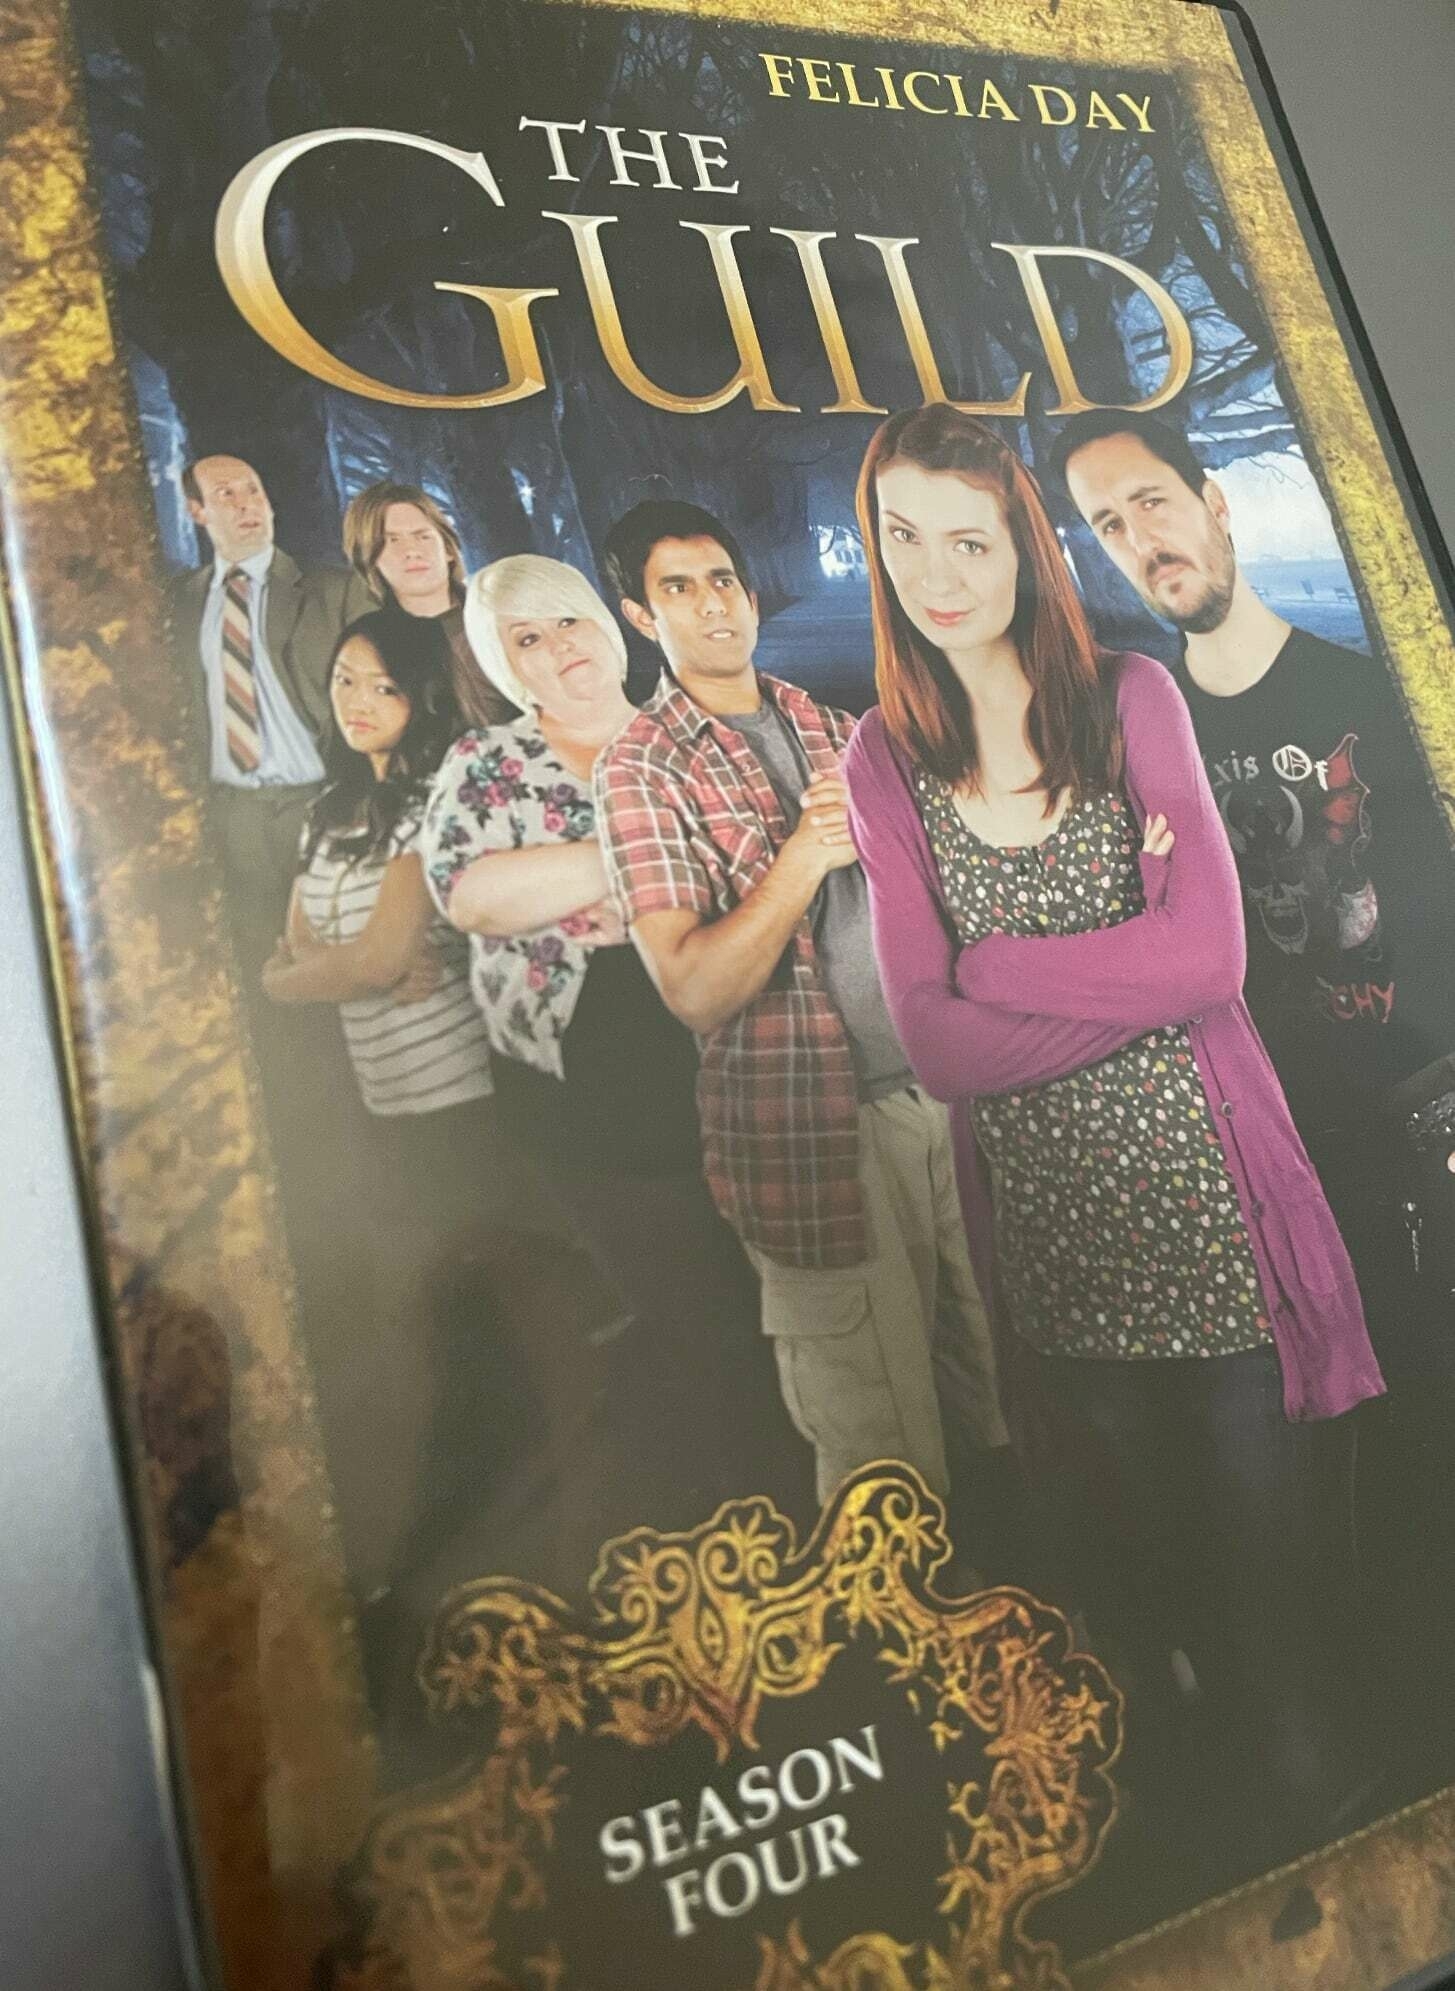 DVD Cover of The Guild season four depicting main cast for that season